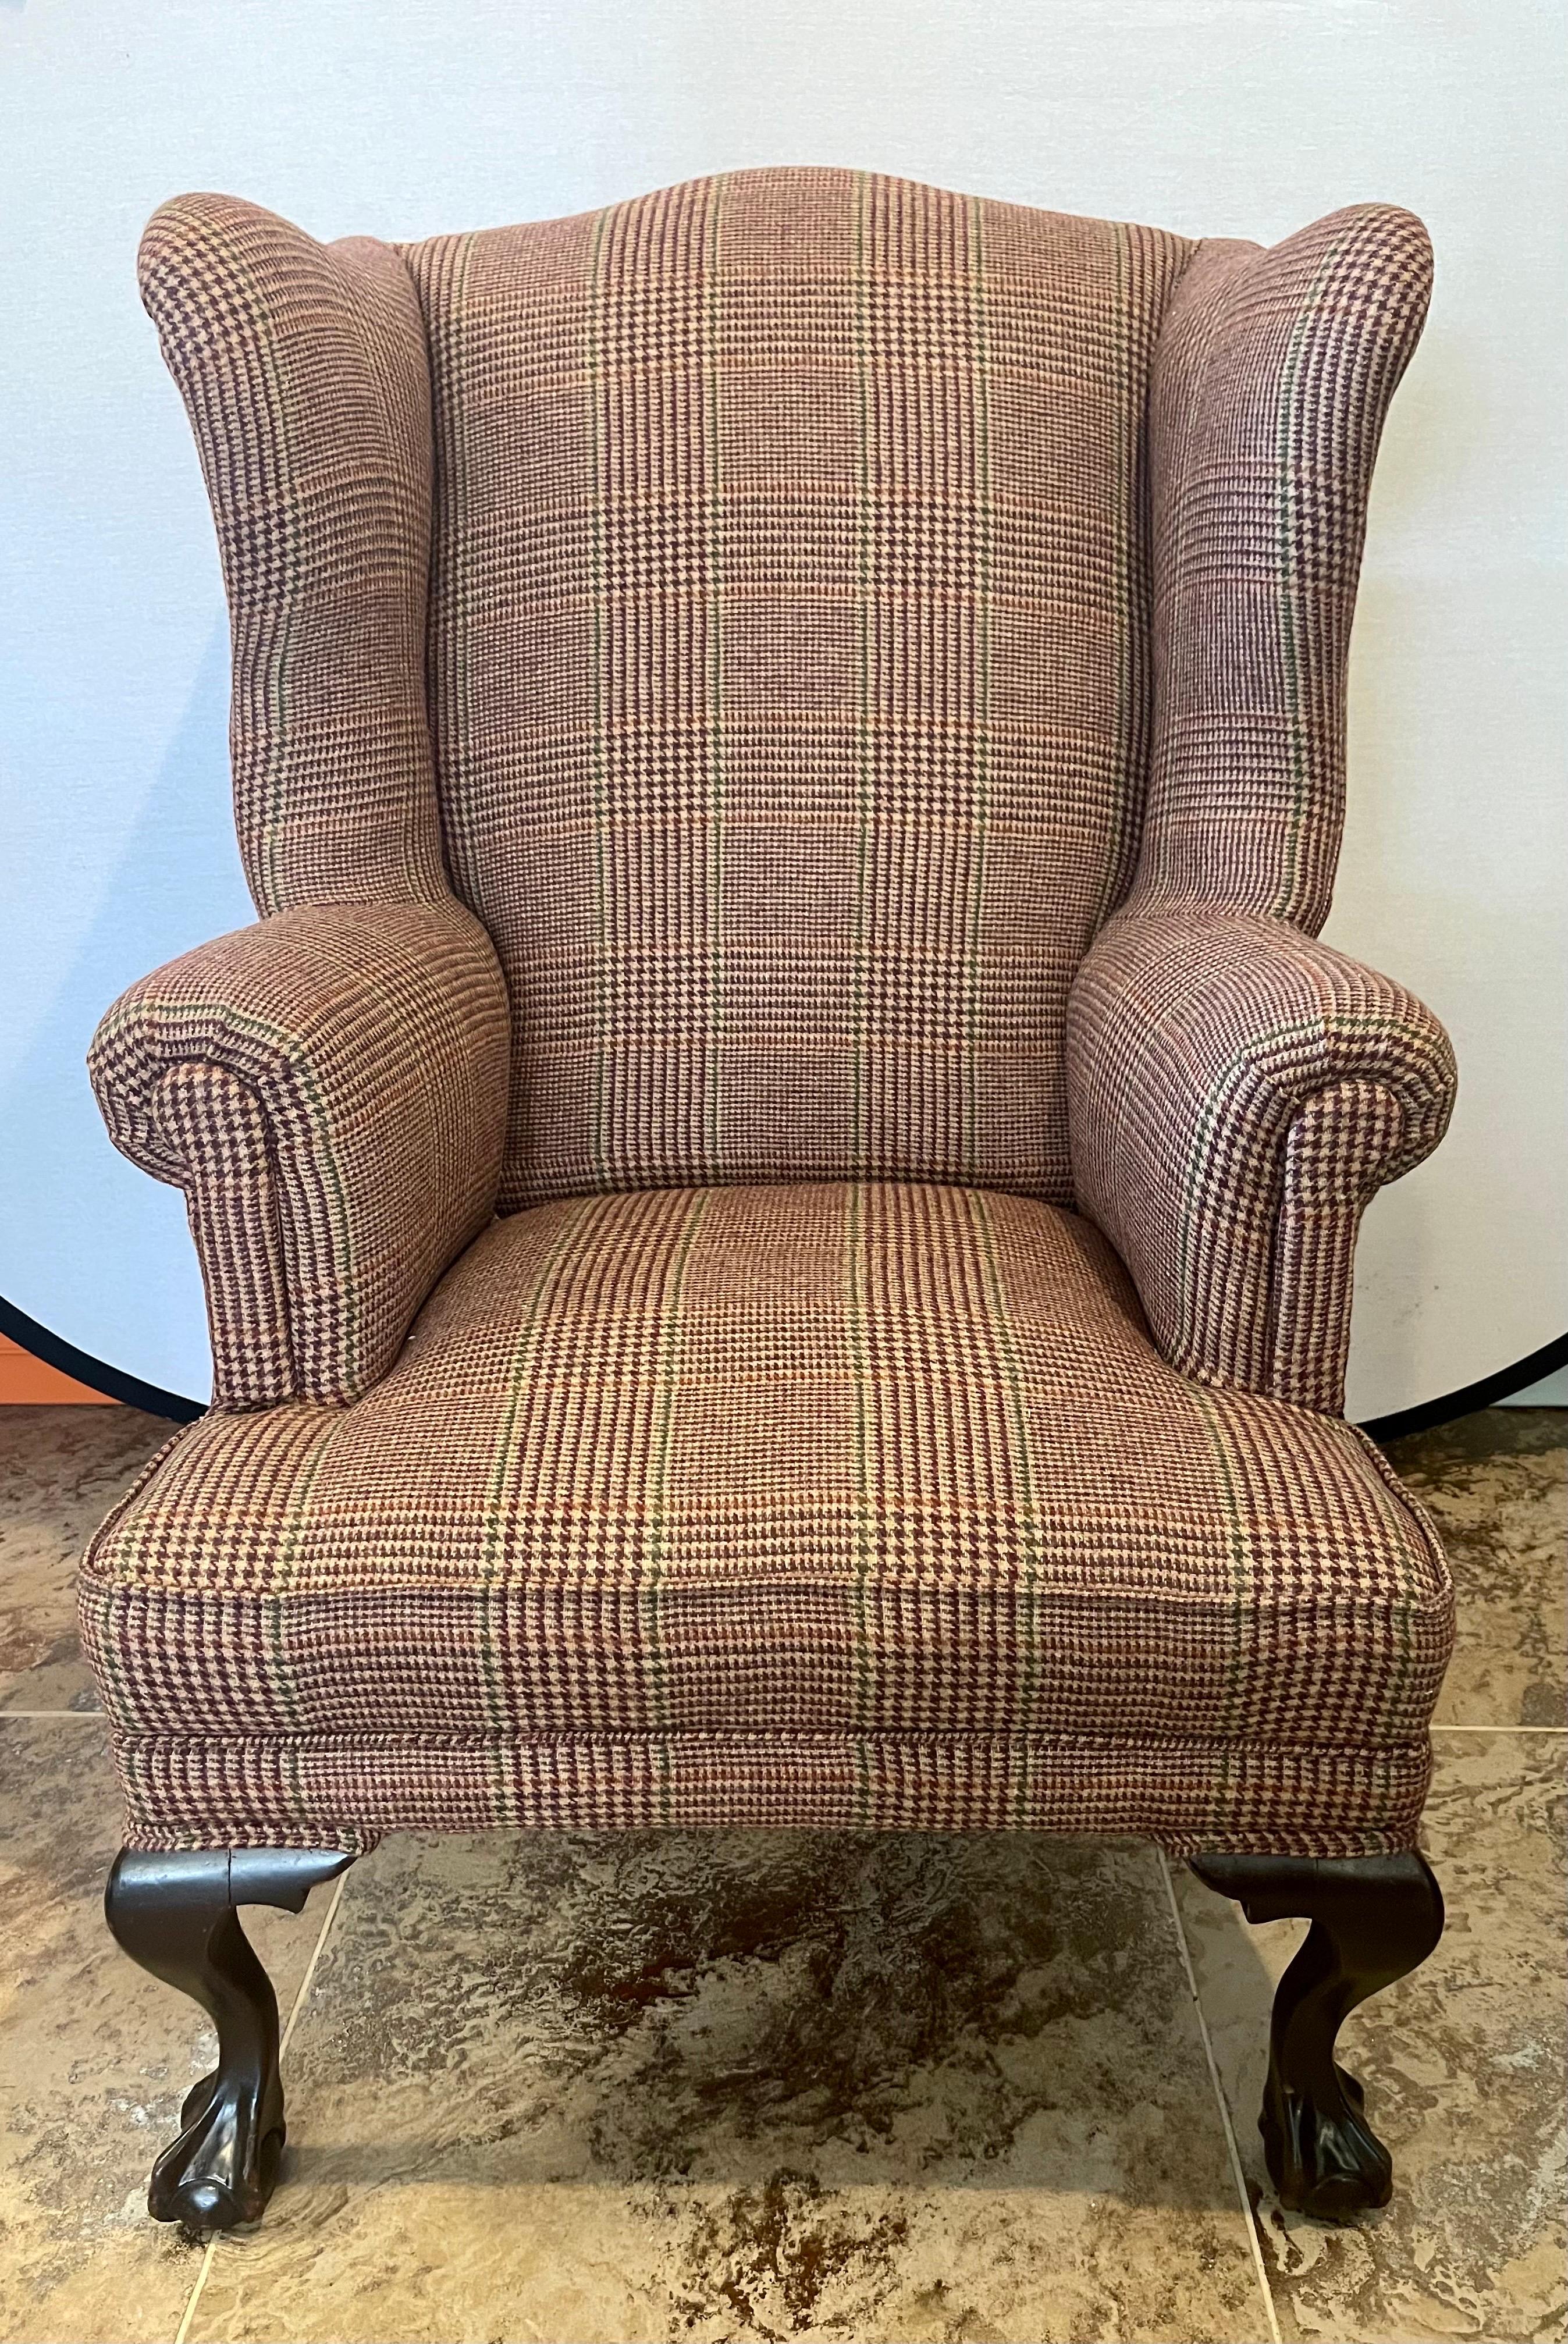 Magnificent Georgian antique wingback chair that has been newly reupholstered in the Ralph Lauren
tartan wool plaid fabric. The tartan plaid fabric melds perfectly with the dark, rich mahogany ball and claw legs.